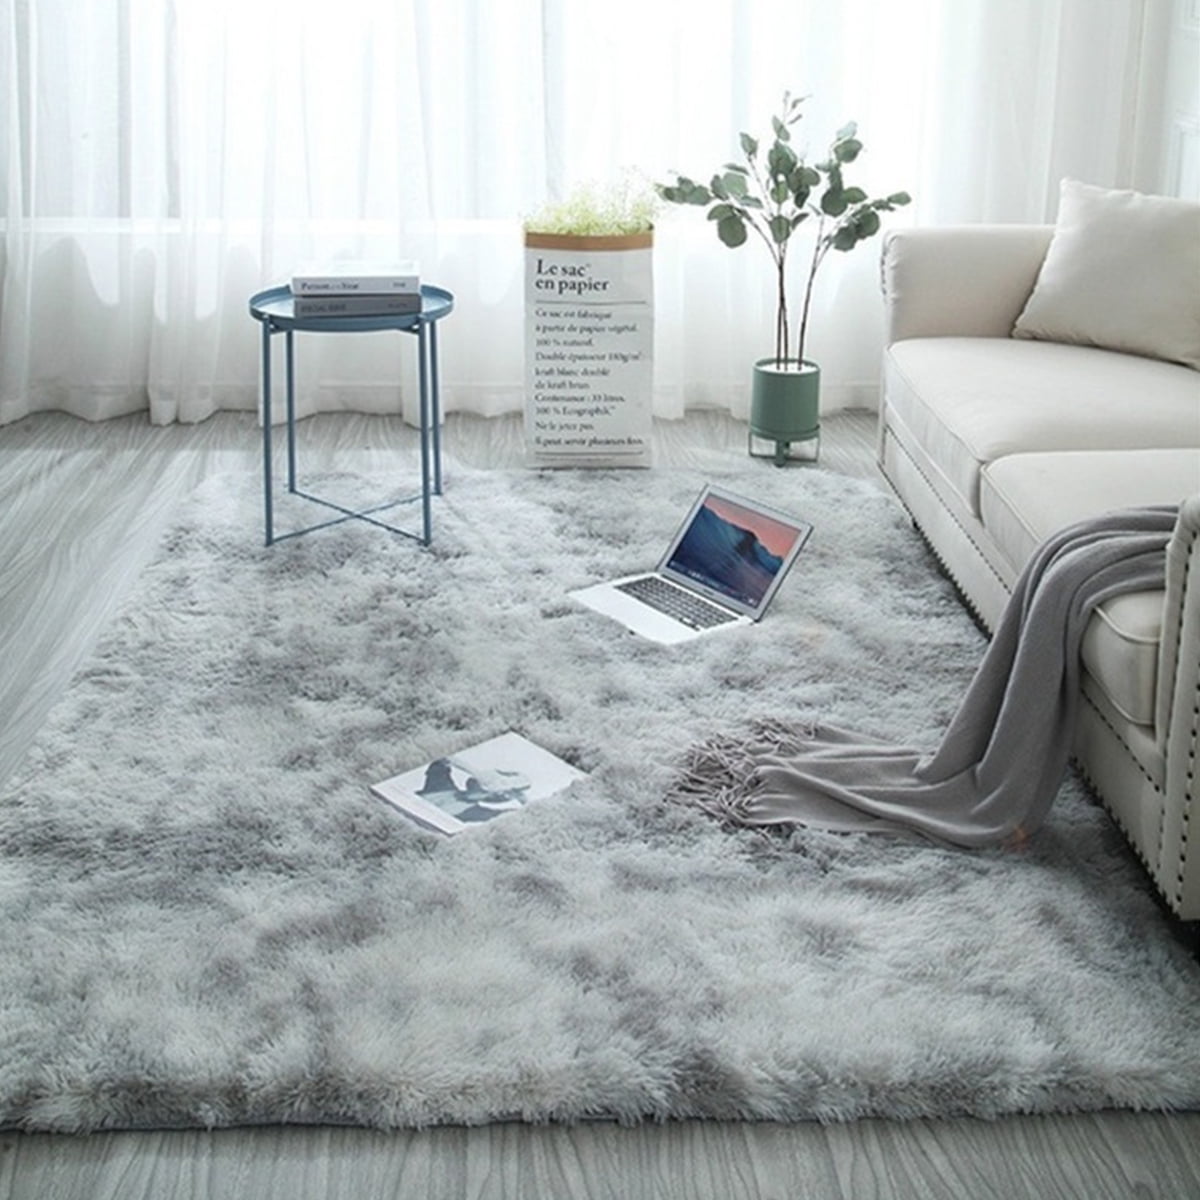 LARGE EXTRA LARGE SMALL SHAGGY RUGS MODERN FLUFFY RUNNER for LIVING ROOM BEDROOM 